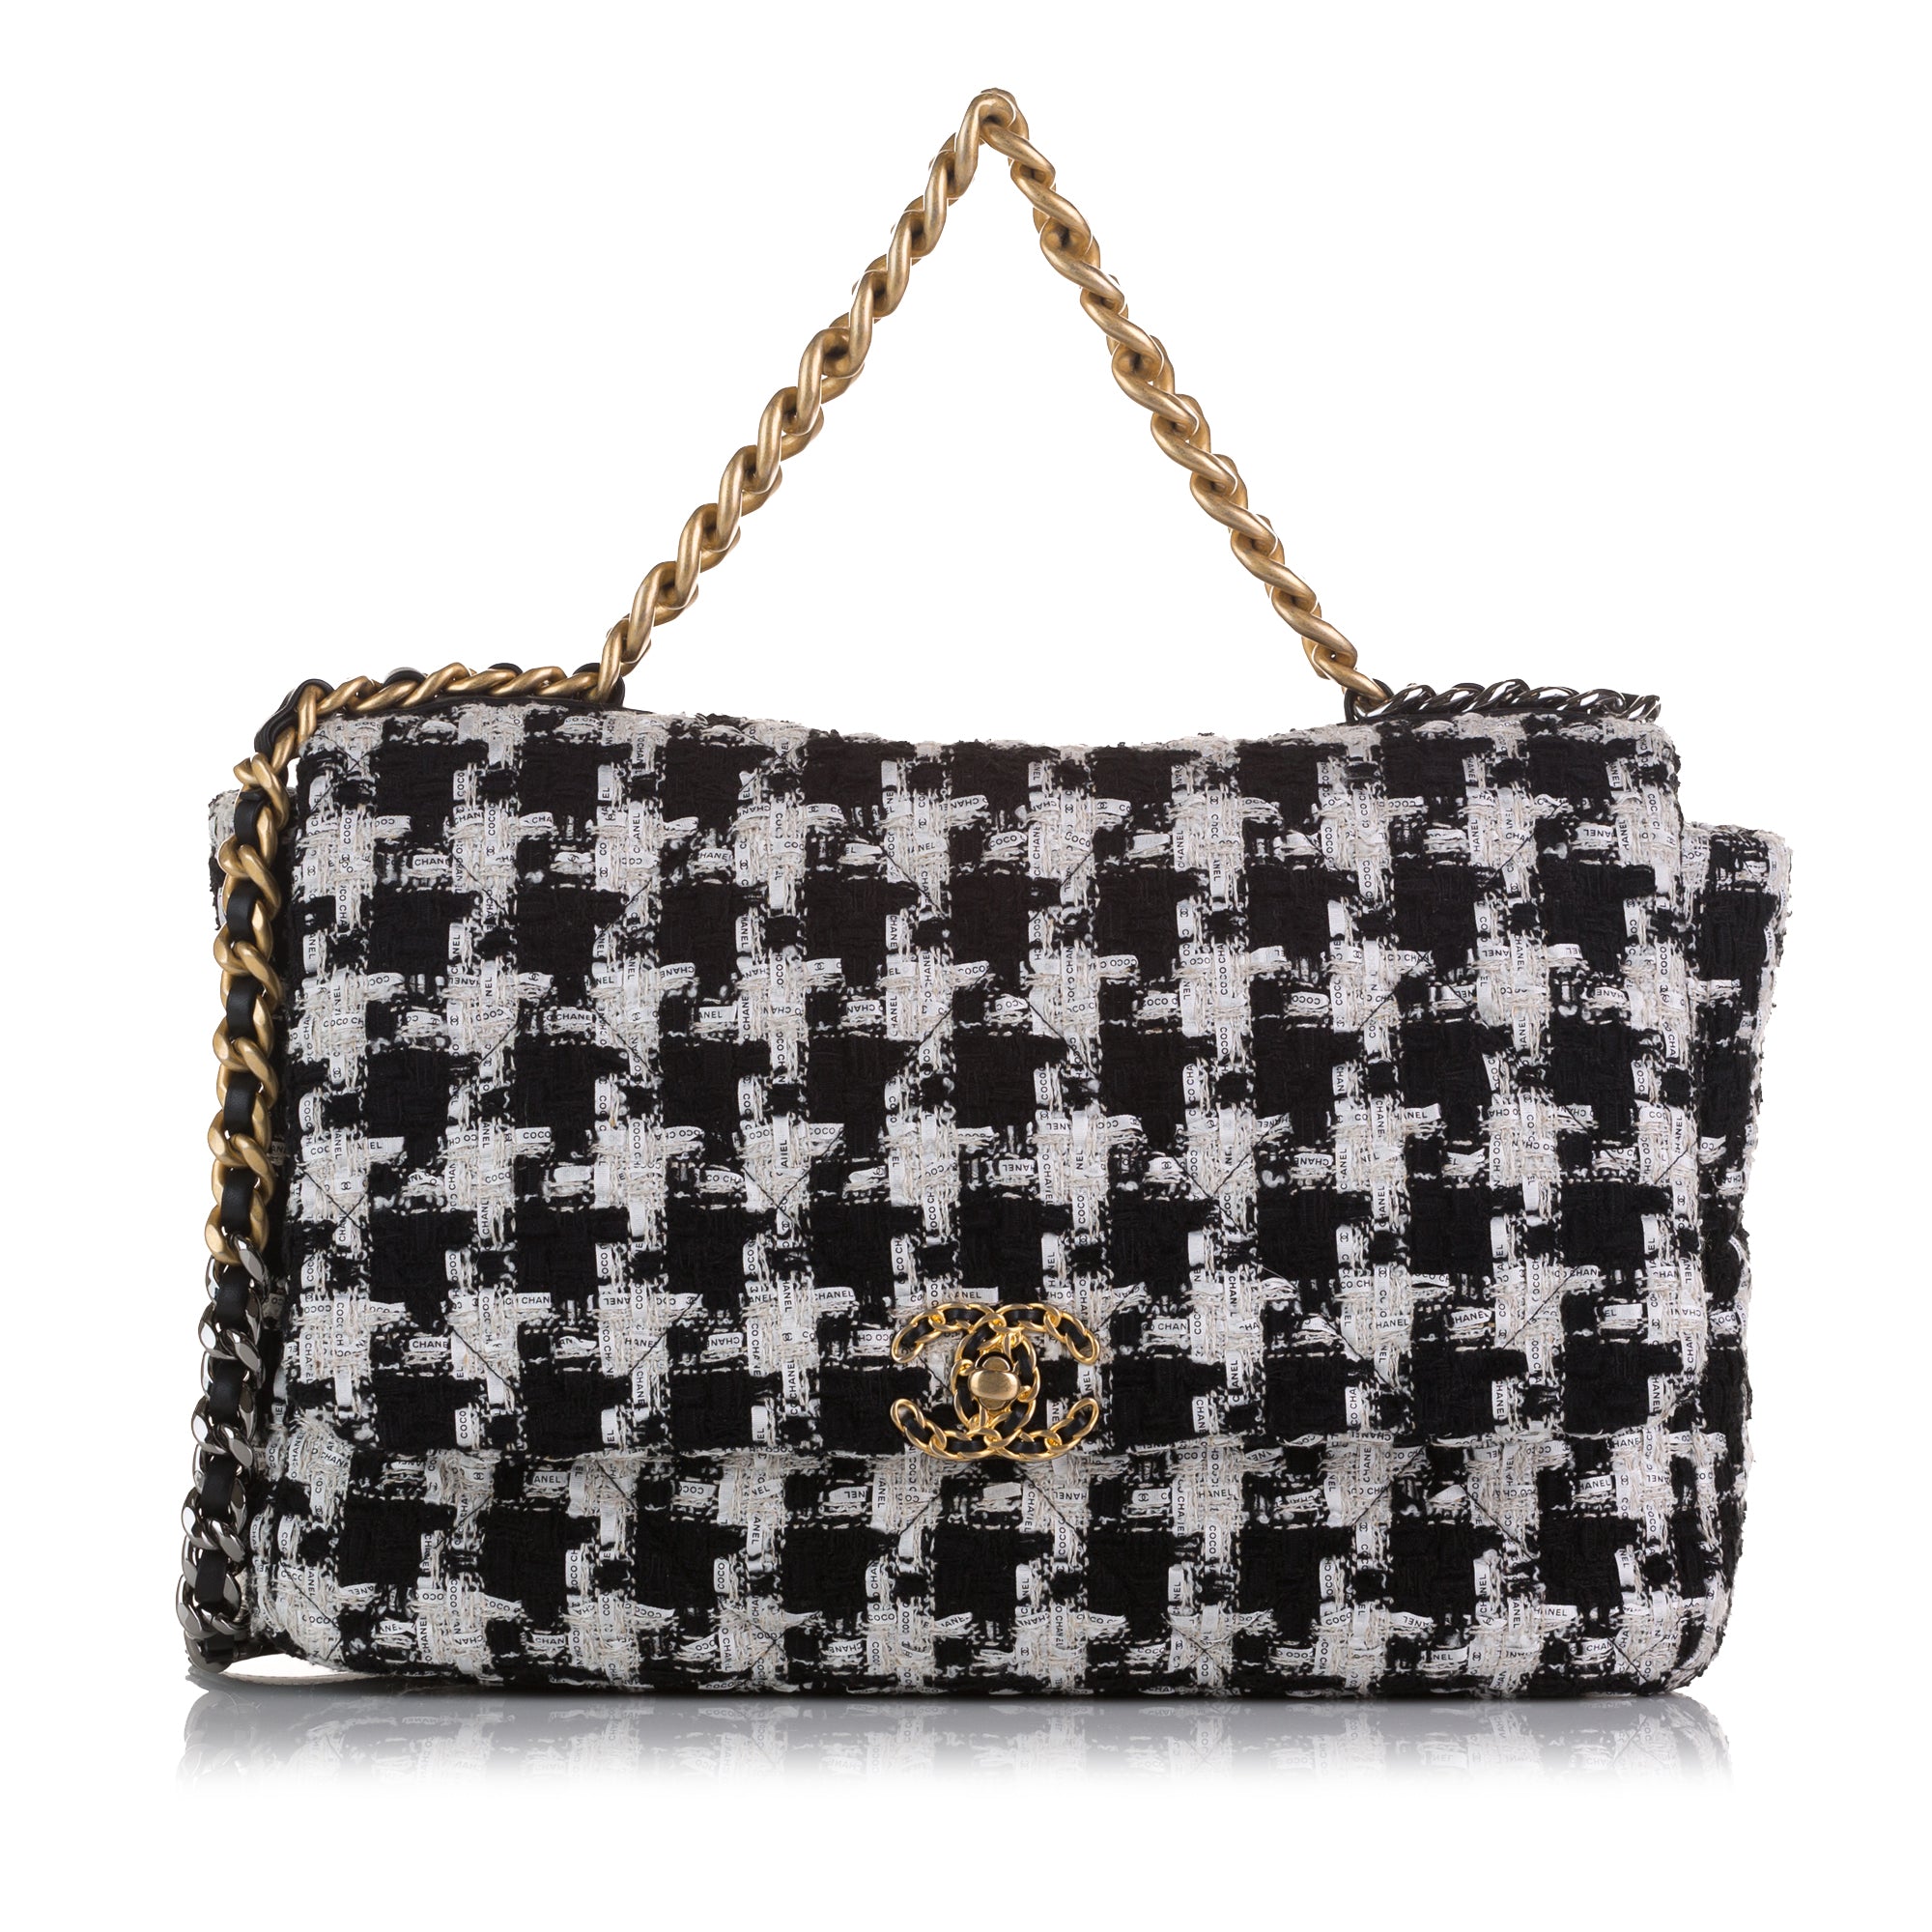 Chanel Tweed Quilted Medium Chanel 19 Flap Black White